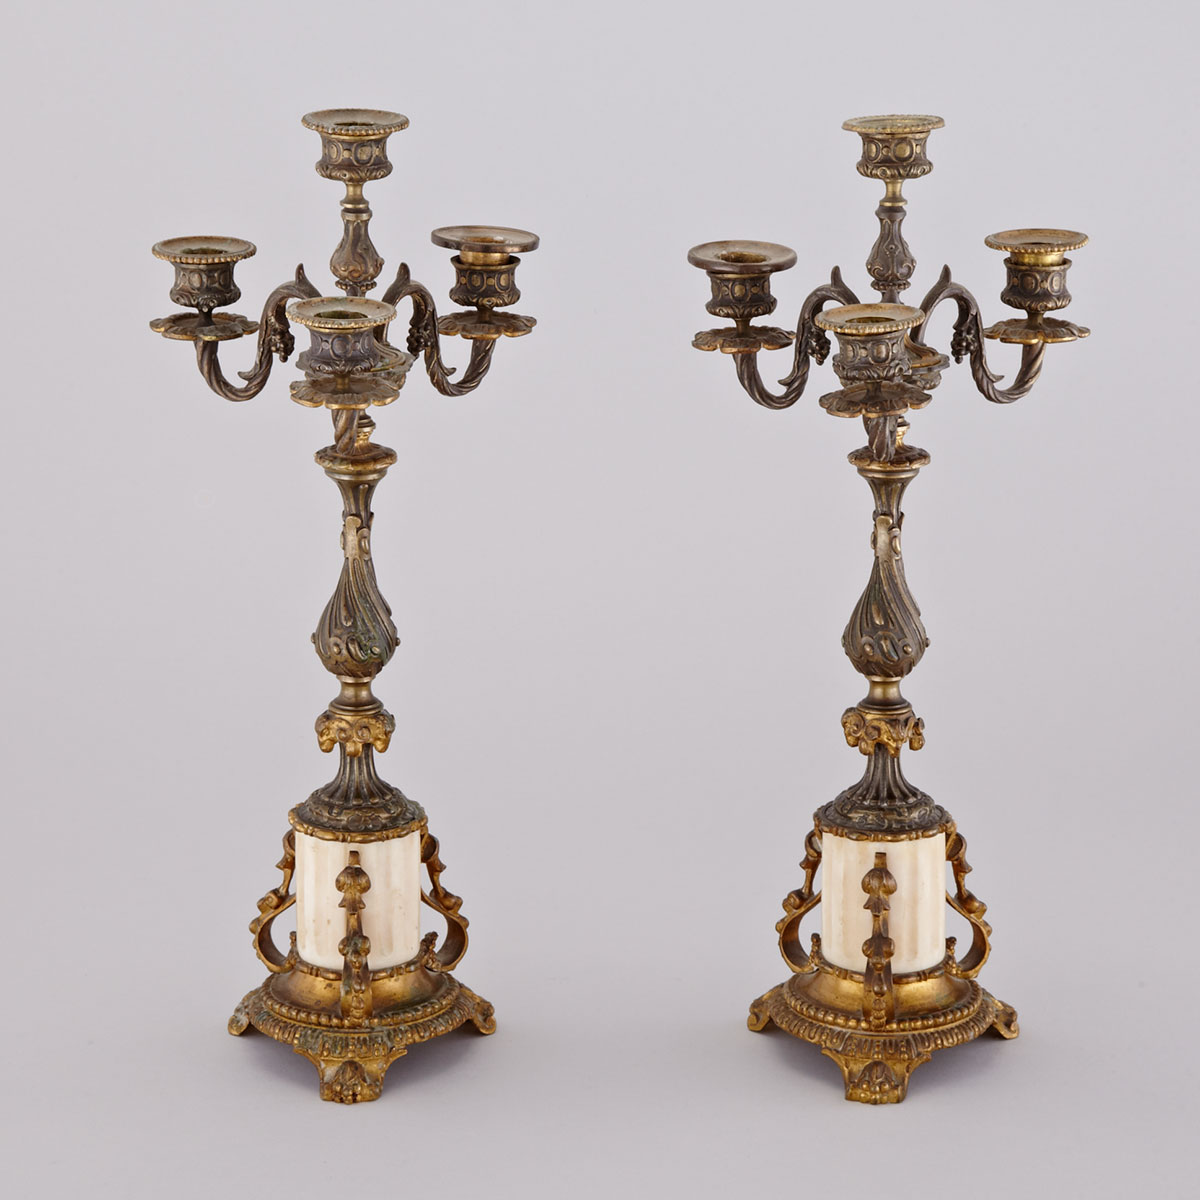 Pair of Marble Mounted Gilt Bronze Five Light Candelabra, 19th century